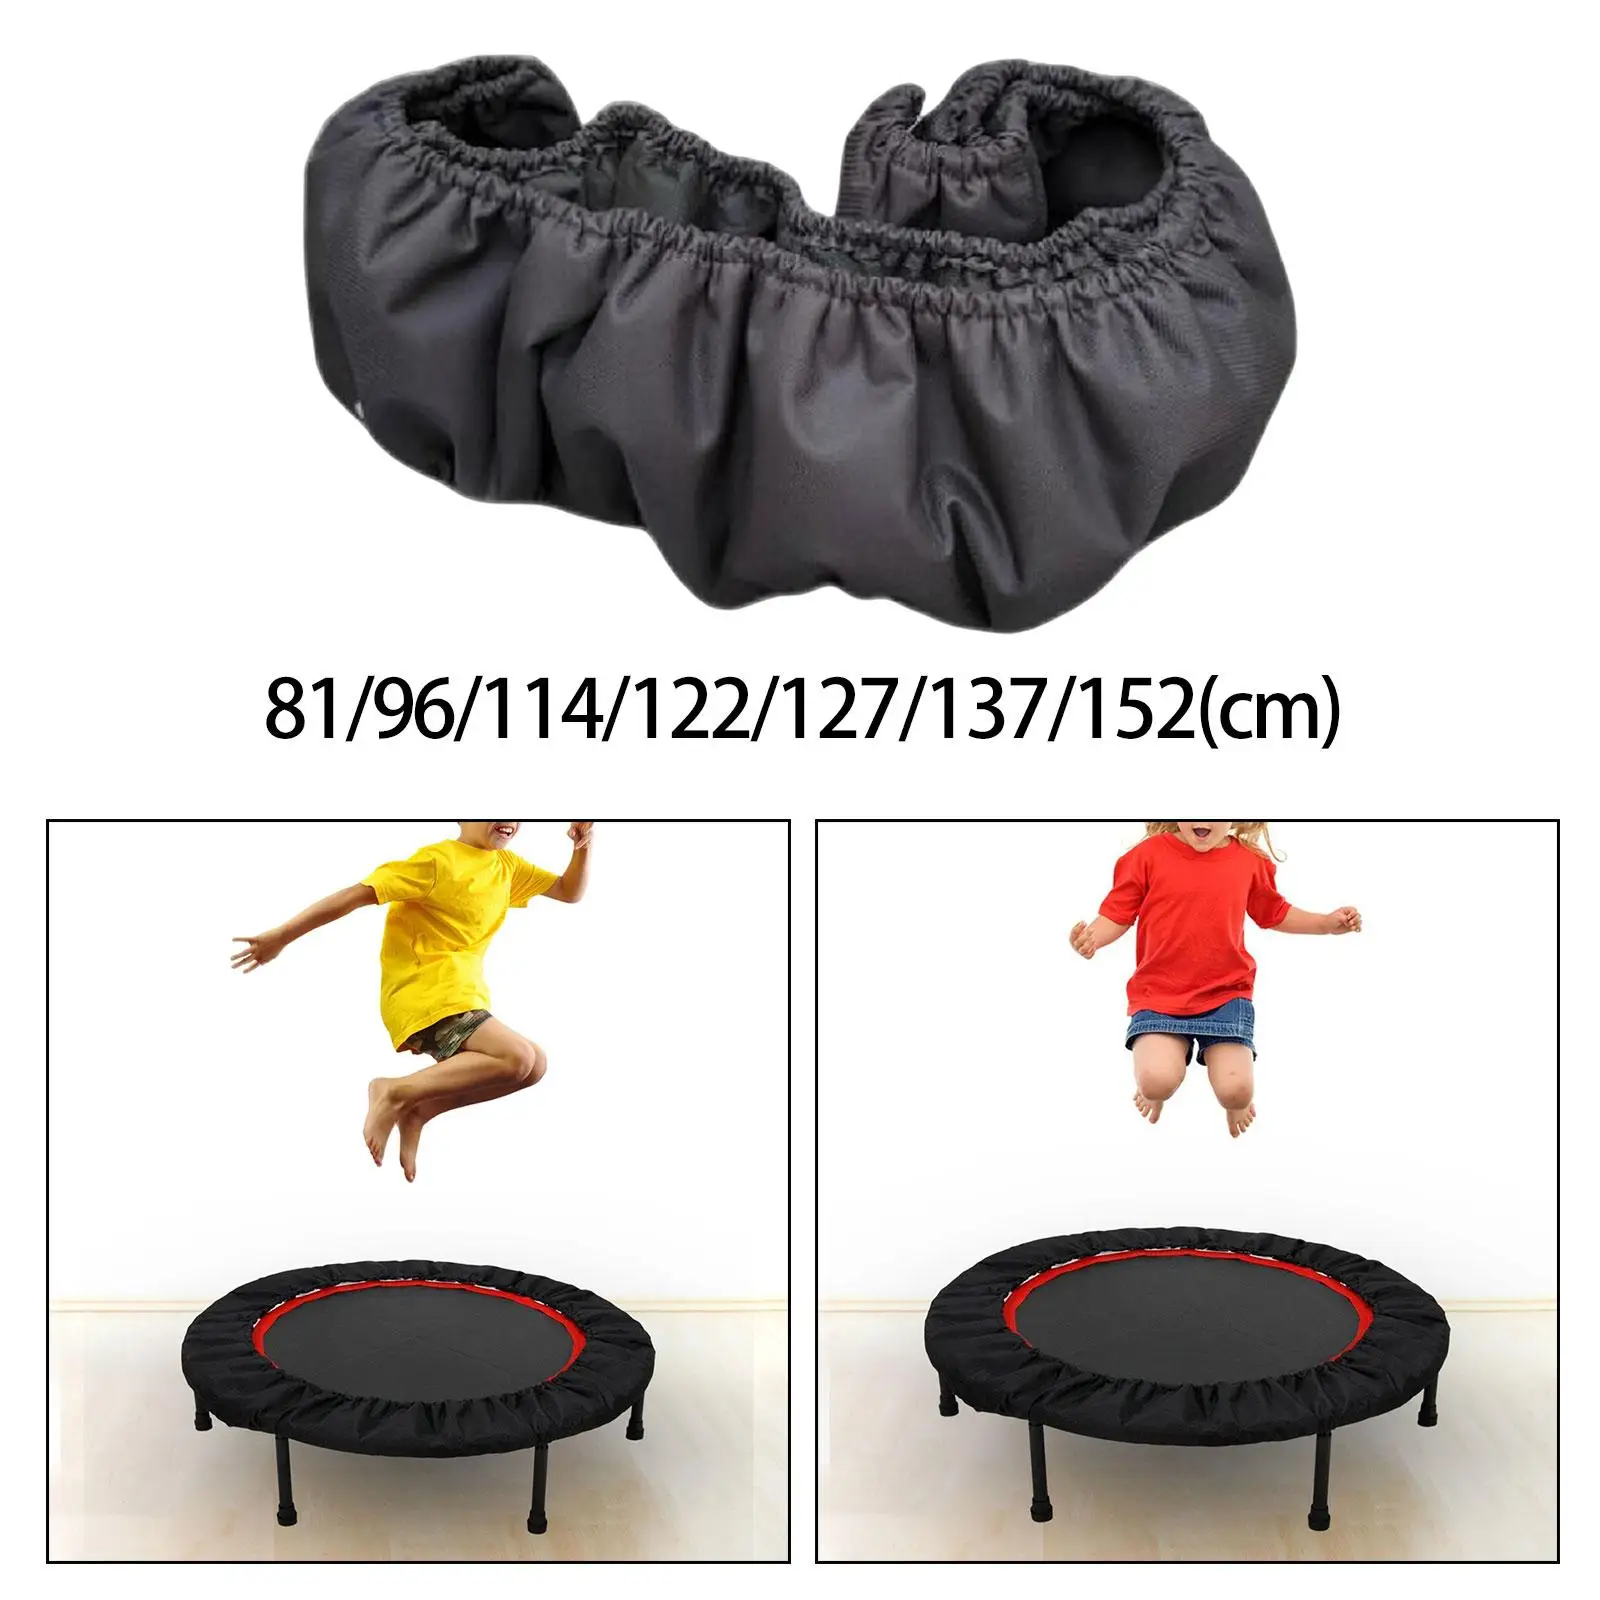 Trampoline Spring Cover Trampoline Cover Round Protective Cover Anti Tearing Durable Edge Protection Replacement